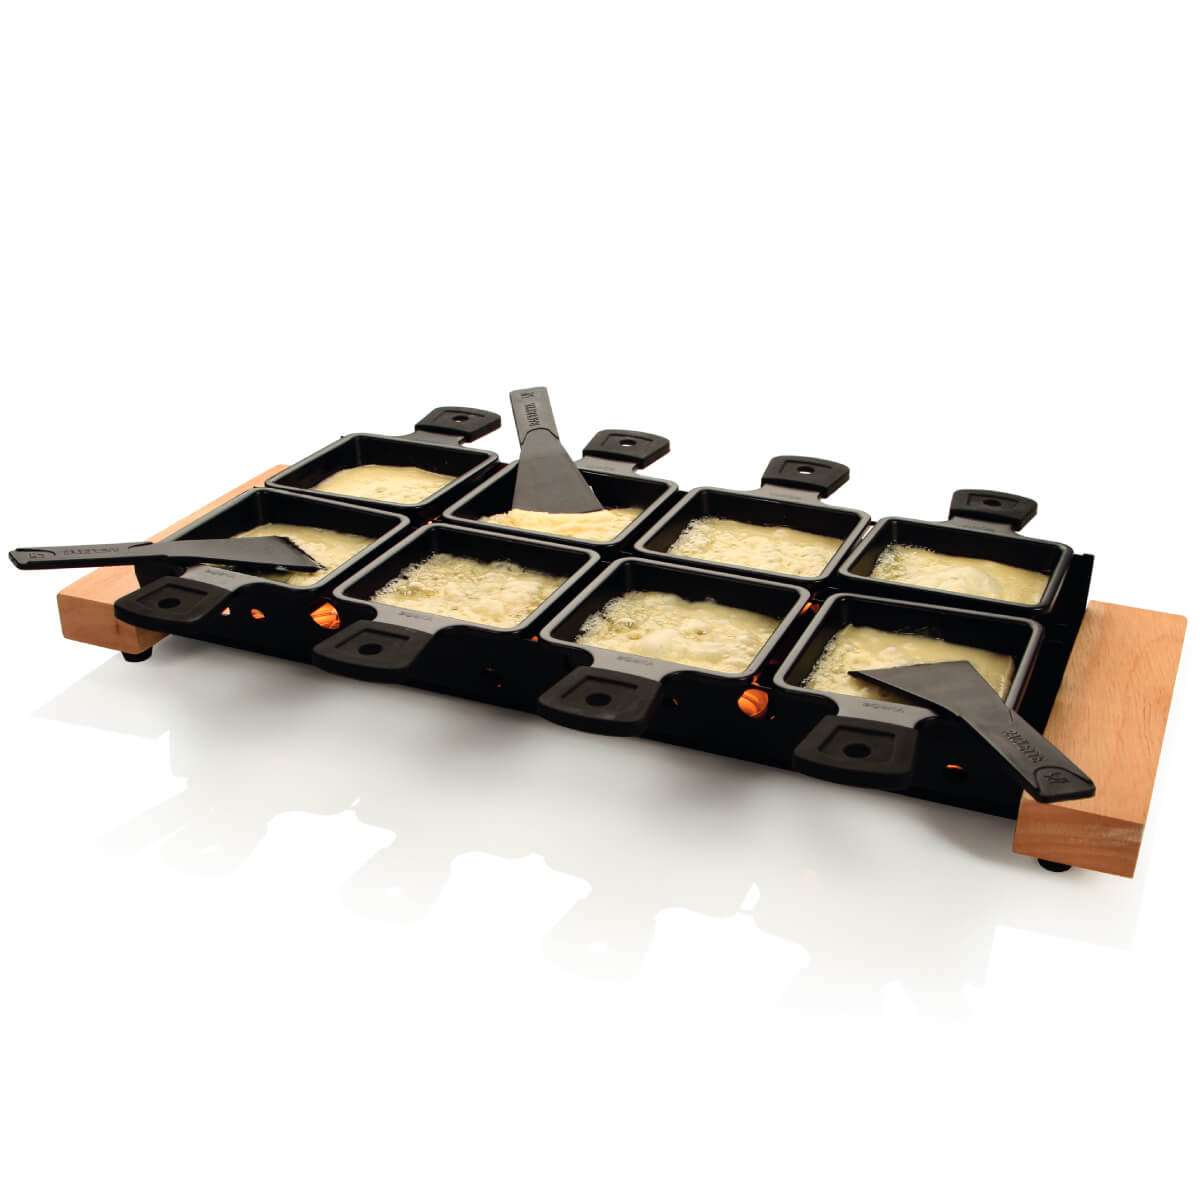 Boska Raclette Grilling Set - Partyclette Grilling To Go Set - Suitable for  Cheese, Meat, Fish, and Vegetables - Portable Non-Stick - Dishwasher Safe